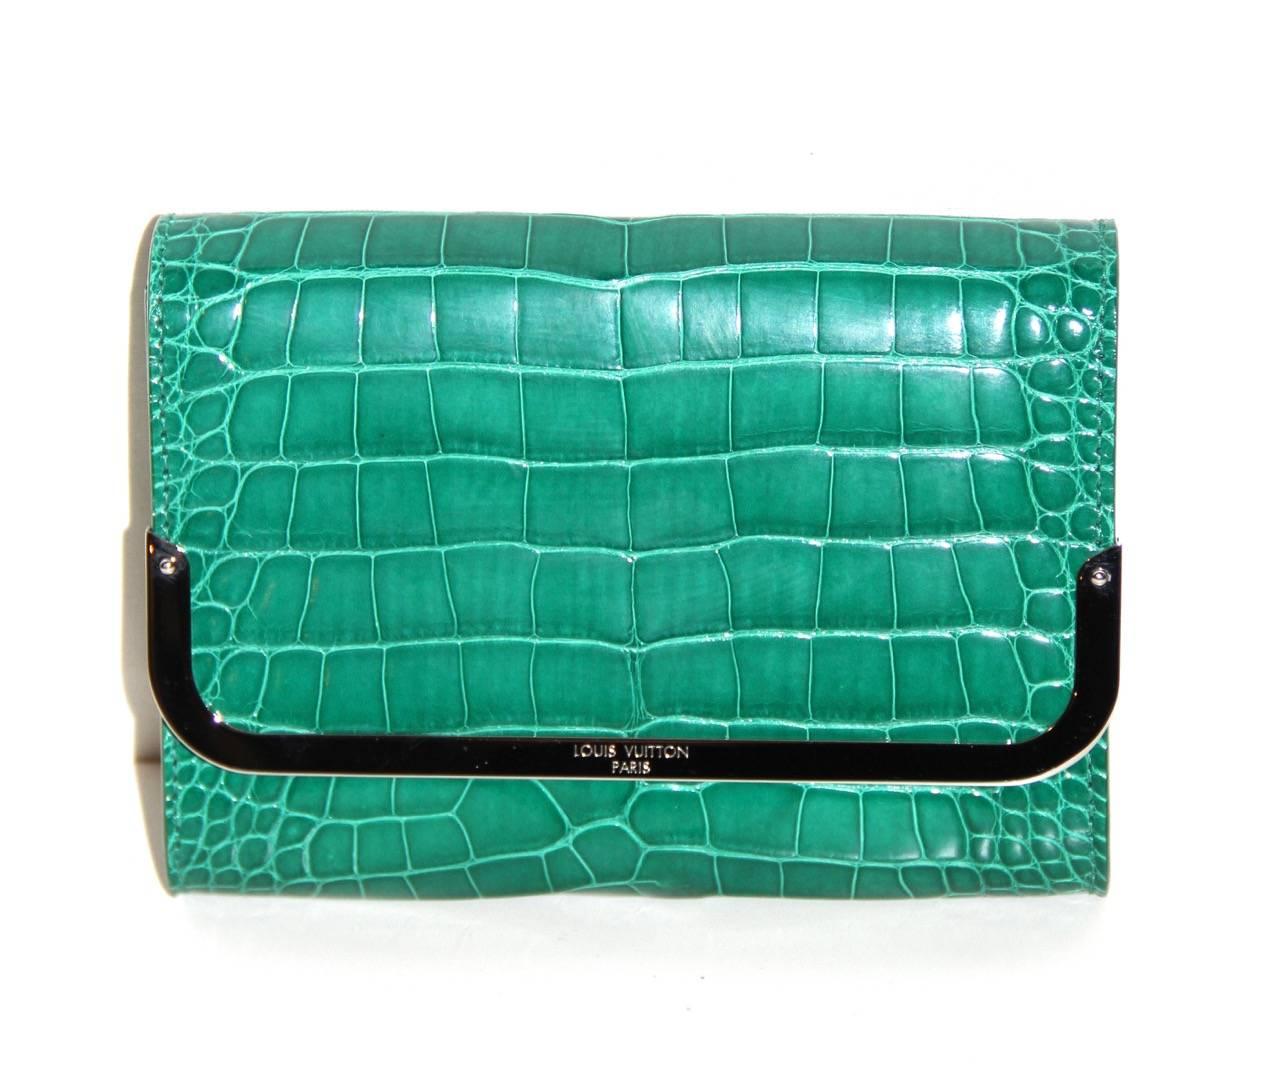 The Rossmore PM is a compact clutch with a signature plaque inspired by trunks. It features a detachable shoulder strap, a magnetic button closure and silver metallic pieces

Collection: 2014
Leather: Crocodile
Color: Green
Hardware: